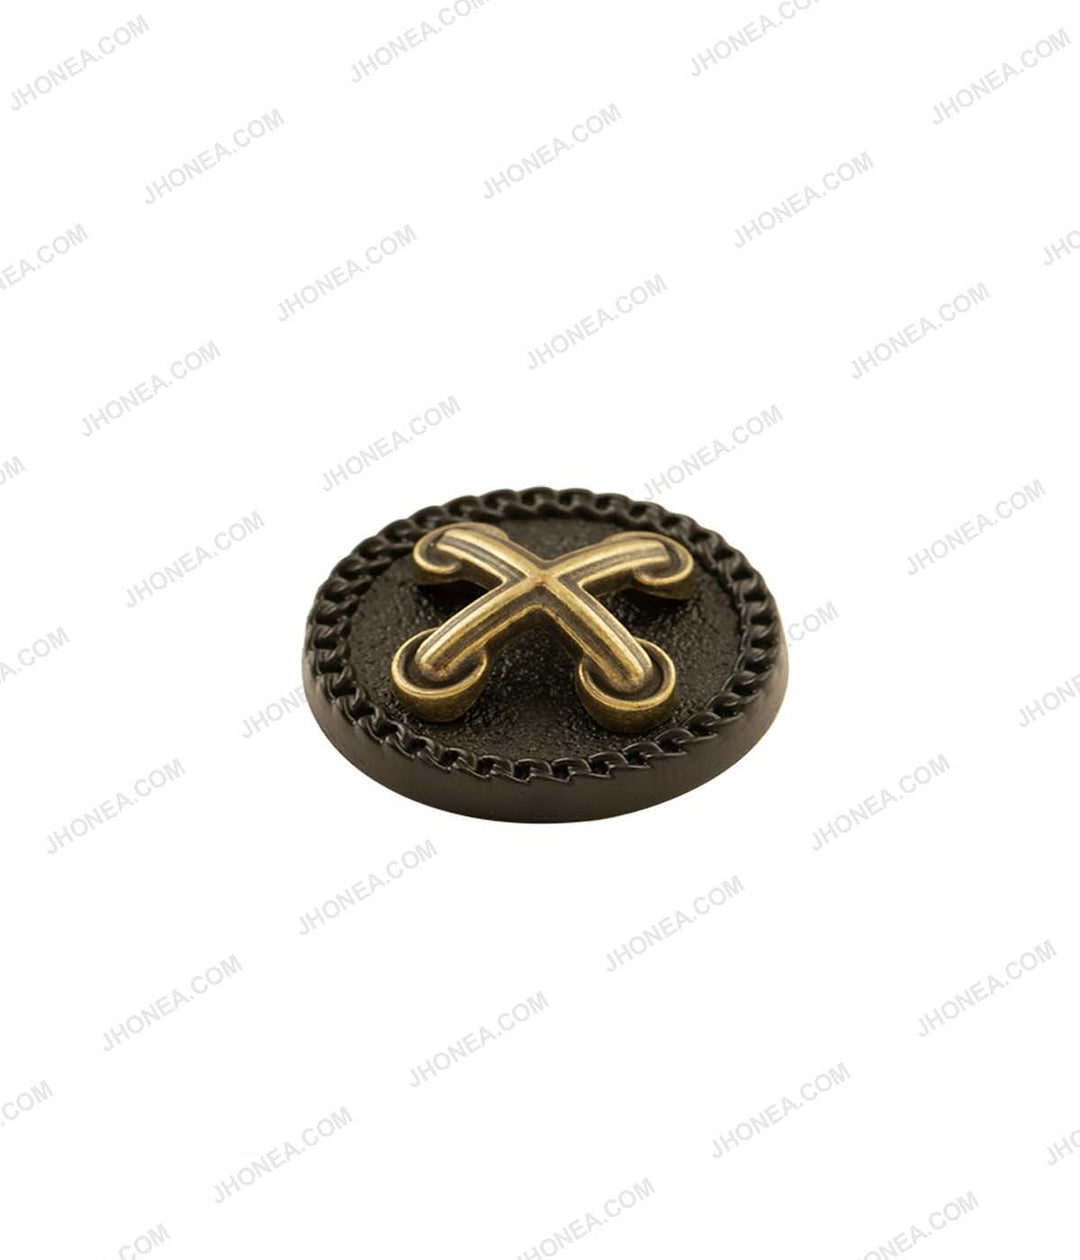 Premium Black with Antique Brass Cross Metal Shank Buttons for Coats